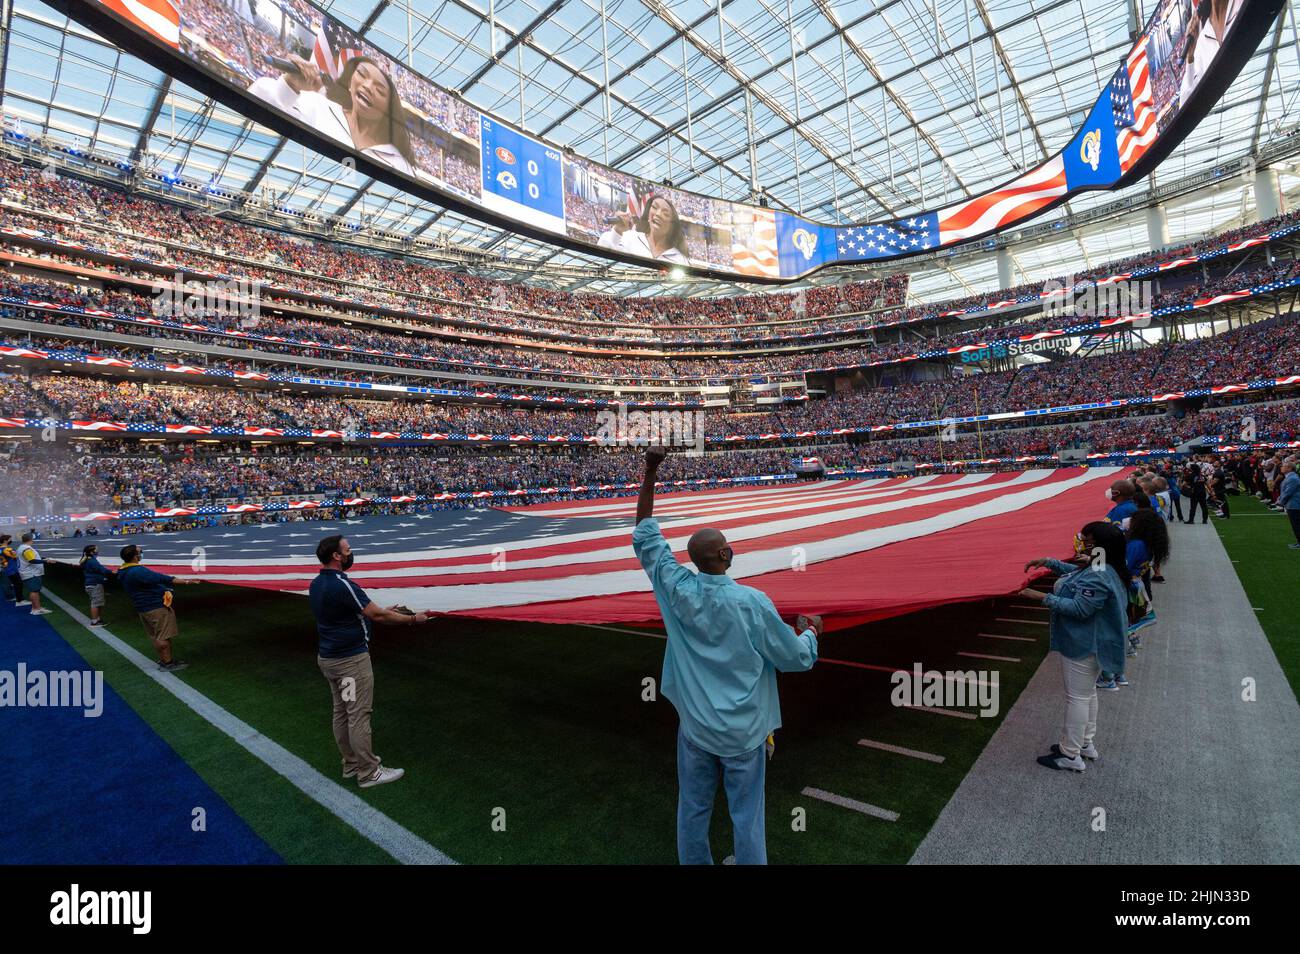 Los Angeles, CA, USA. 30th Jan, 2022. A large American flag covers the  field during pre game ceremony during the NFC Championship game at SoFi  Stadium on Sunday, Jan. 30, 2022 in